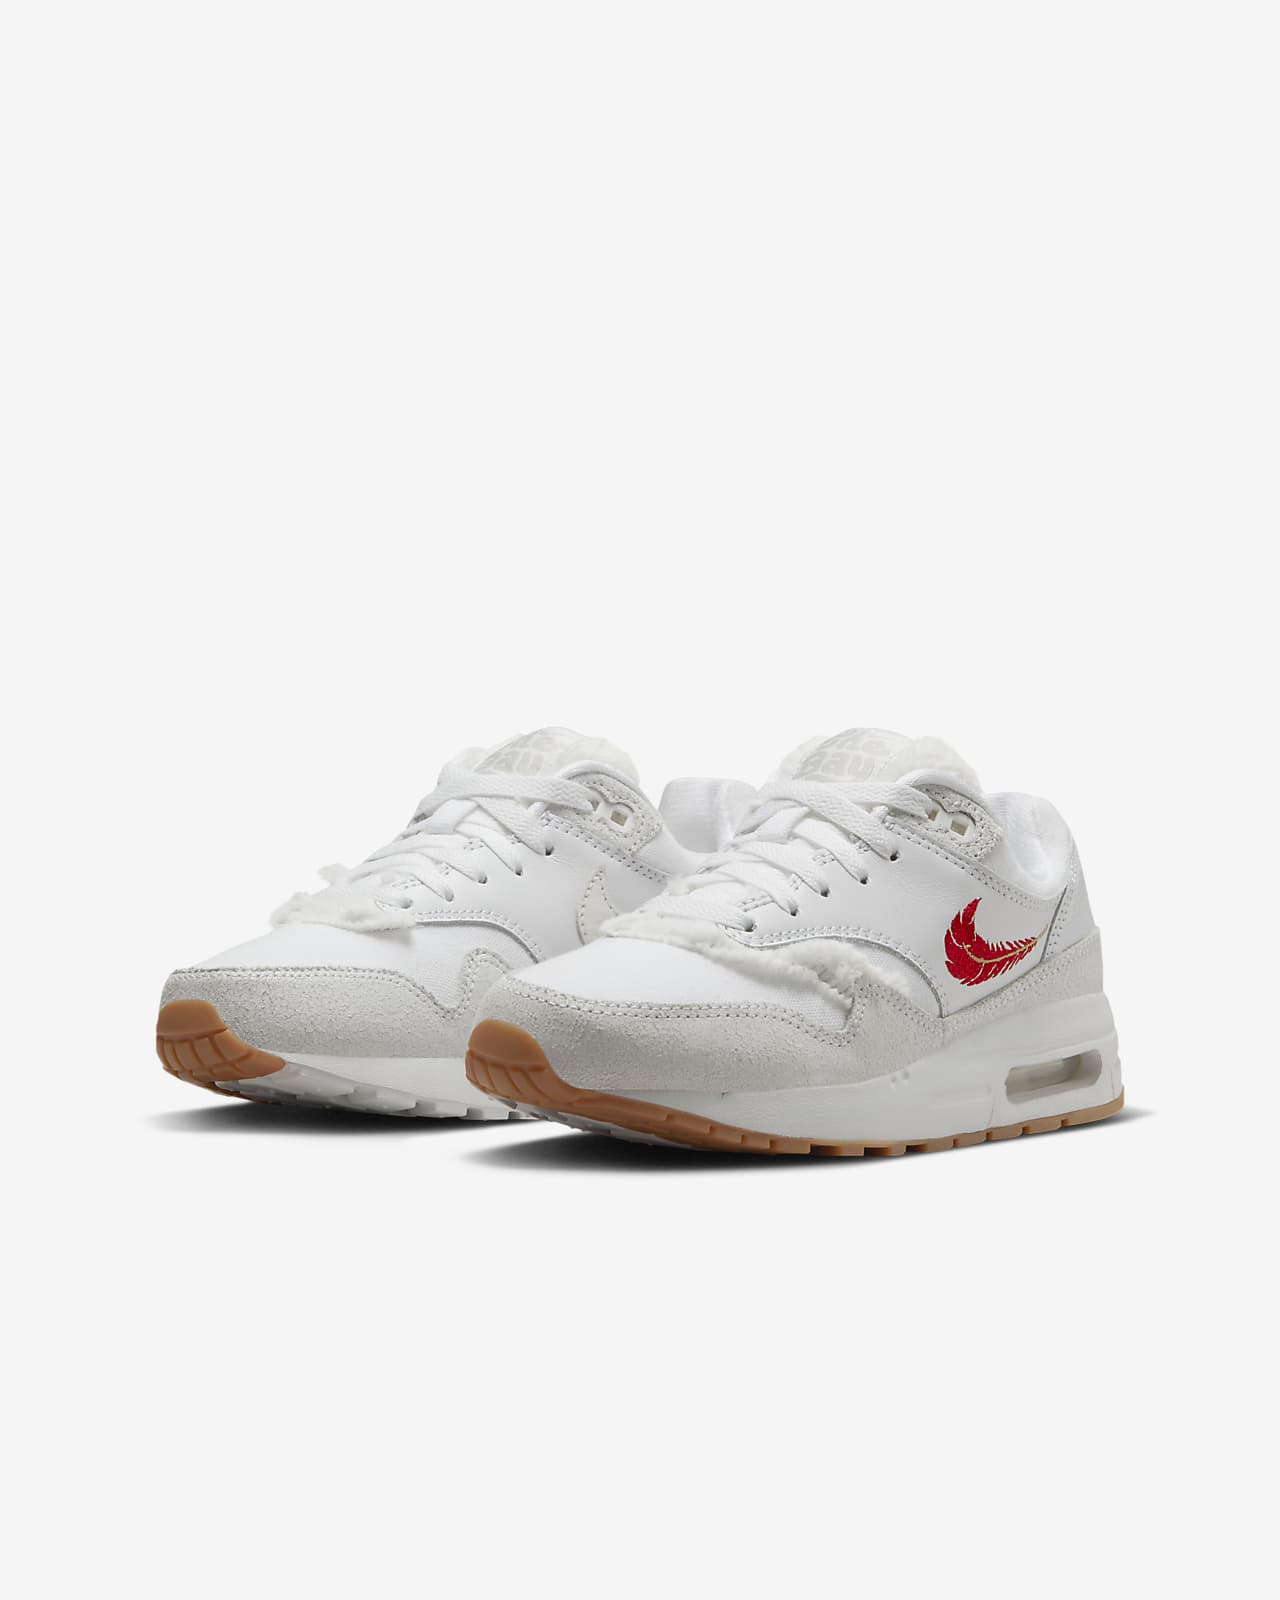 At deaktivere Loaded Stolpe Nike Air Max 1 Big Kid's Shoes. Nike.com